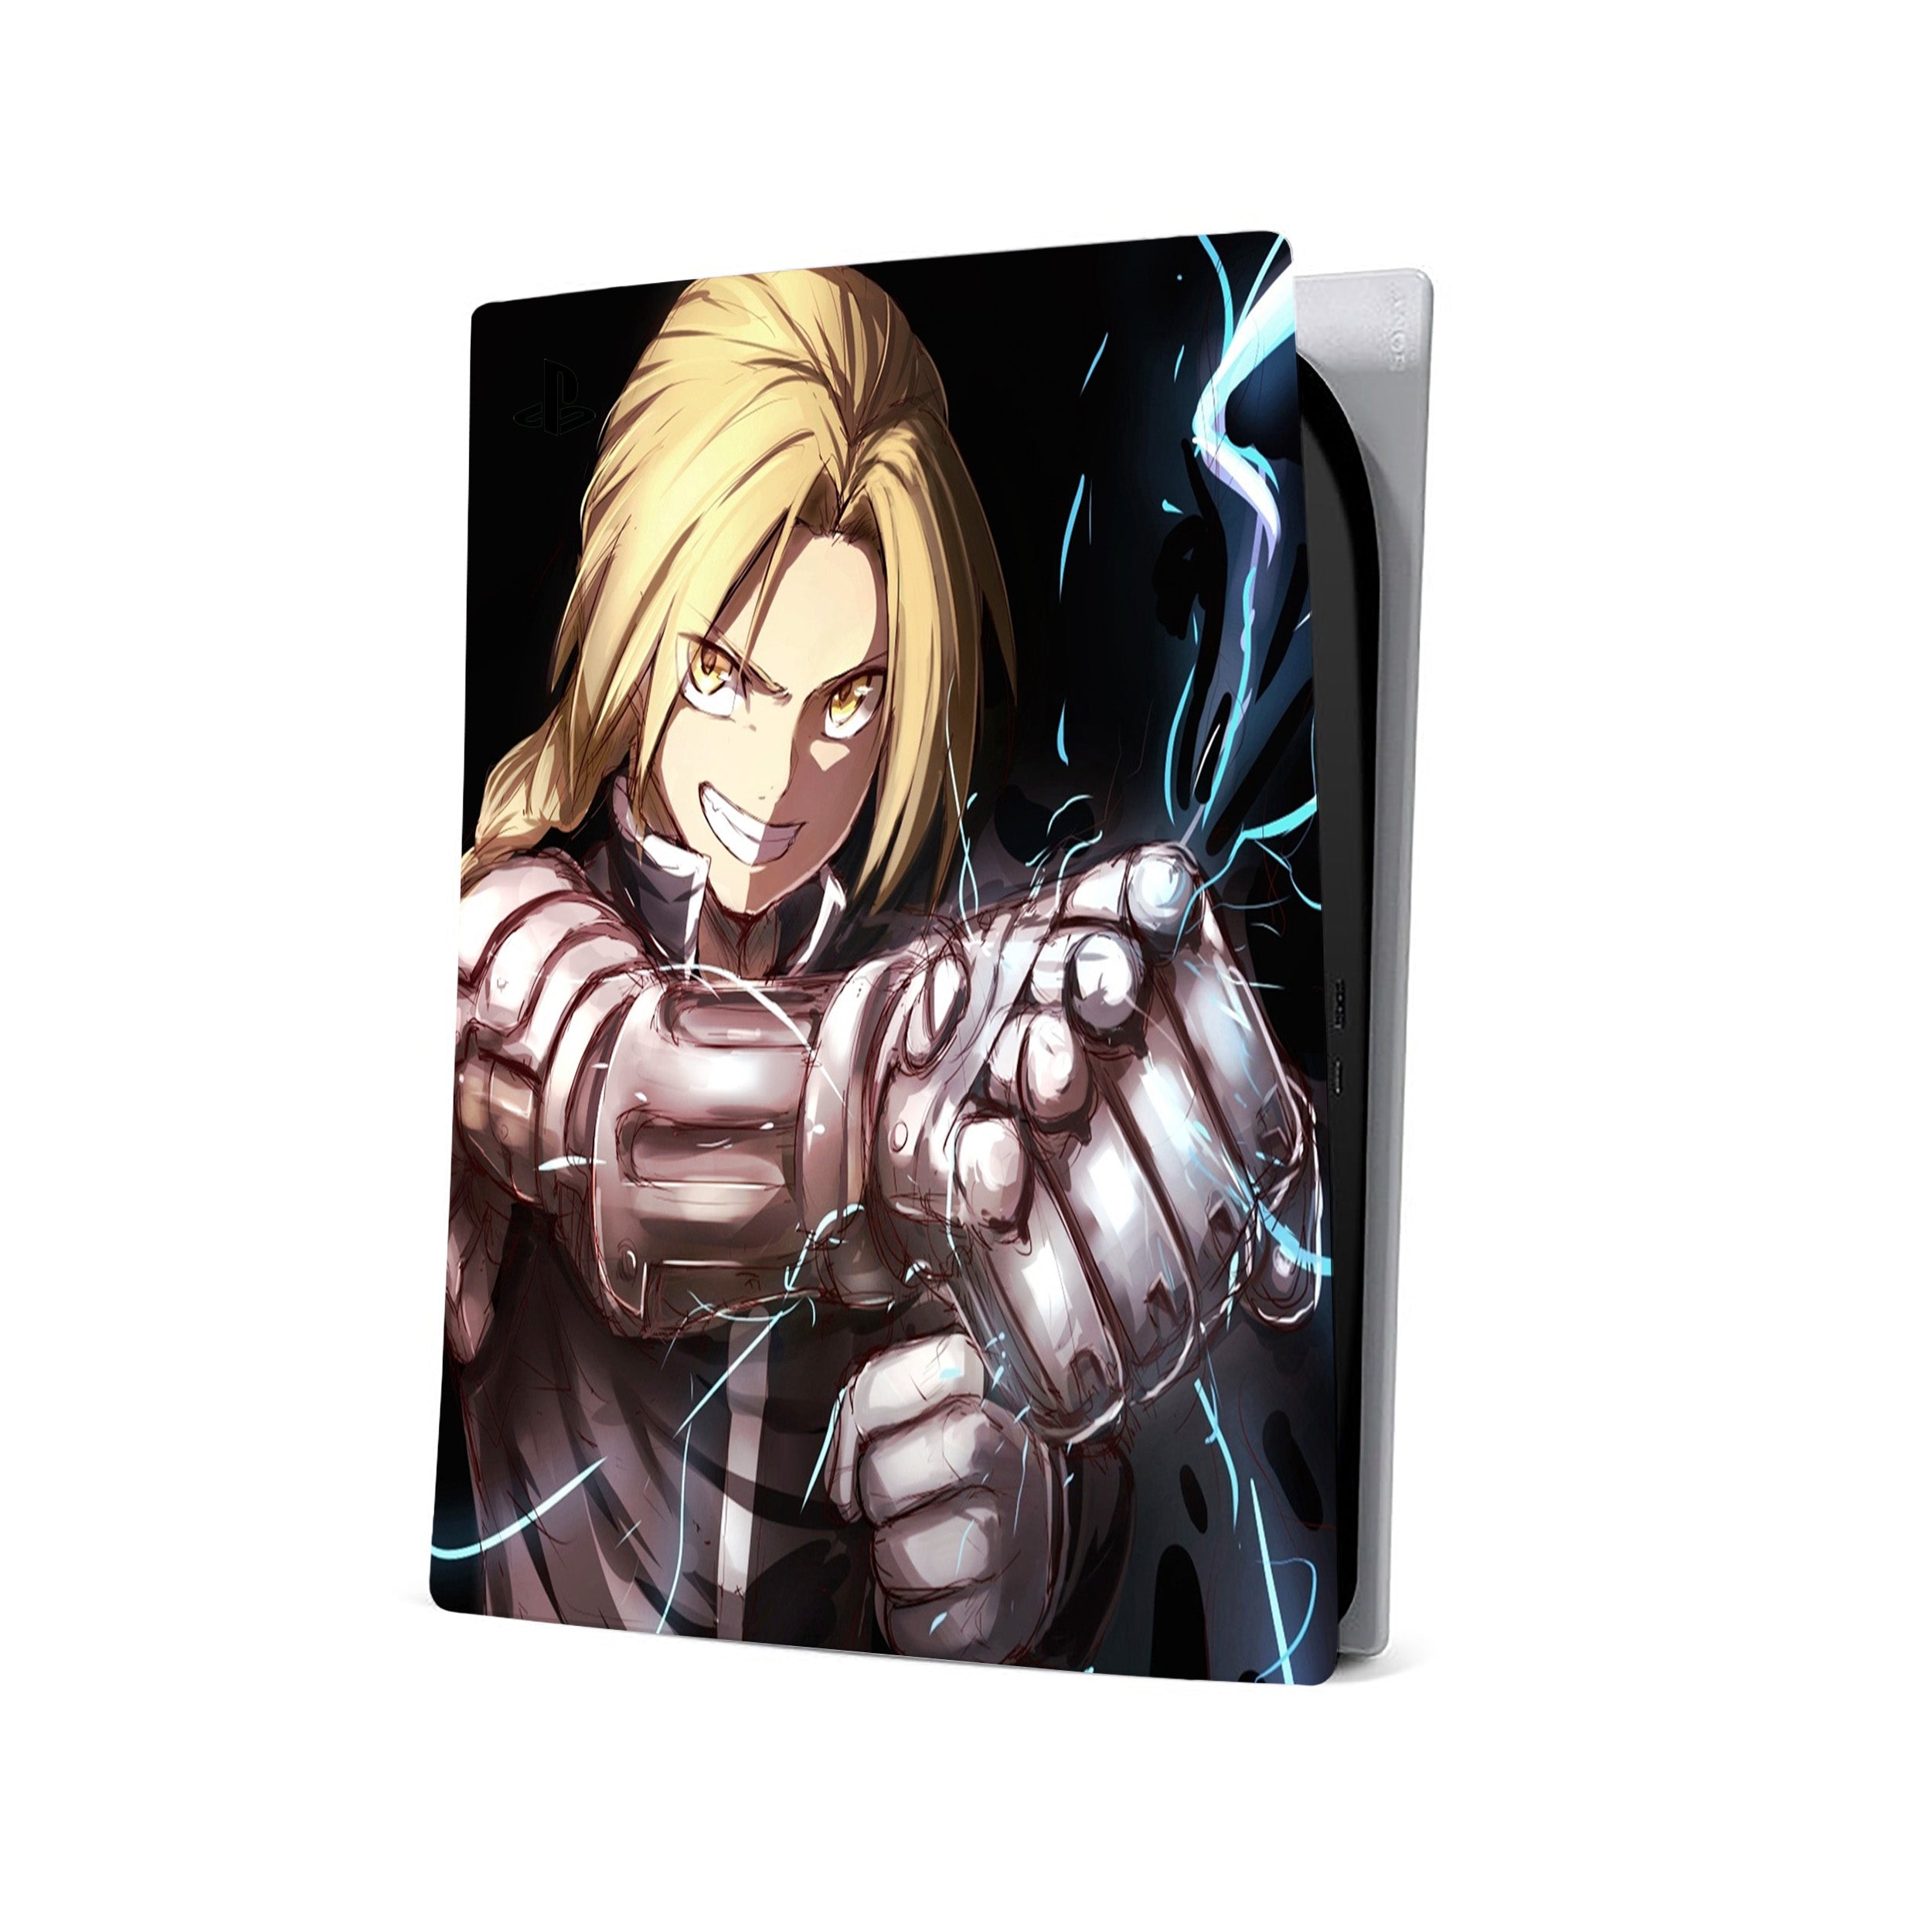 A video game skin featuring a Fullmetal Alchemist Edward Elric design for the PS5.